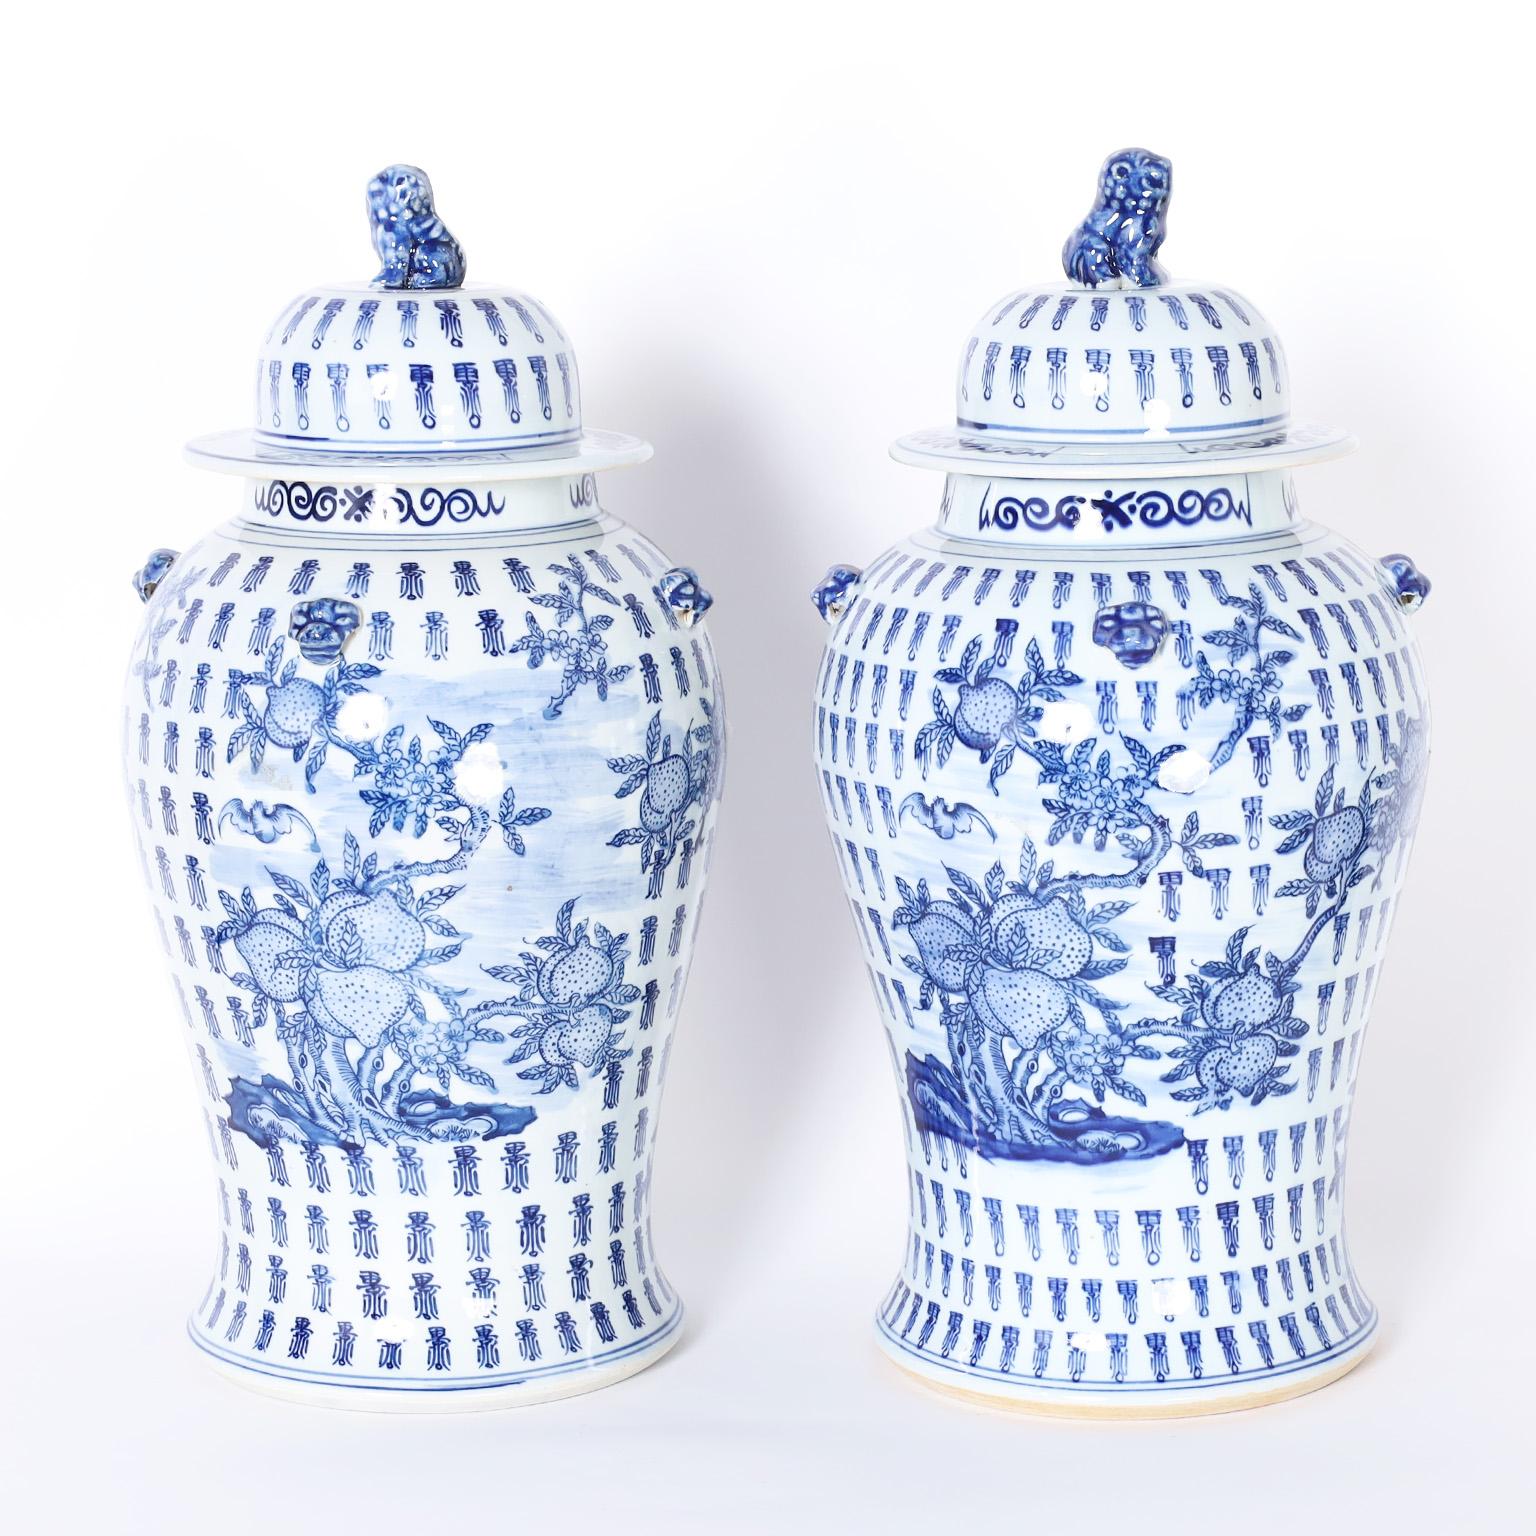 Pair of Chinese blue and white porcelain lidded urns with classic form featuring foo dog handles on top and hand decorated with an auspicious composition of fruit trees and birds in a field of repeating characters.